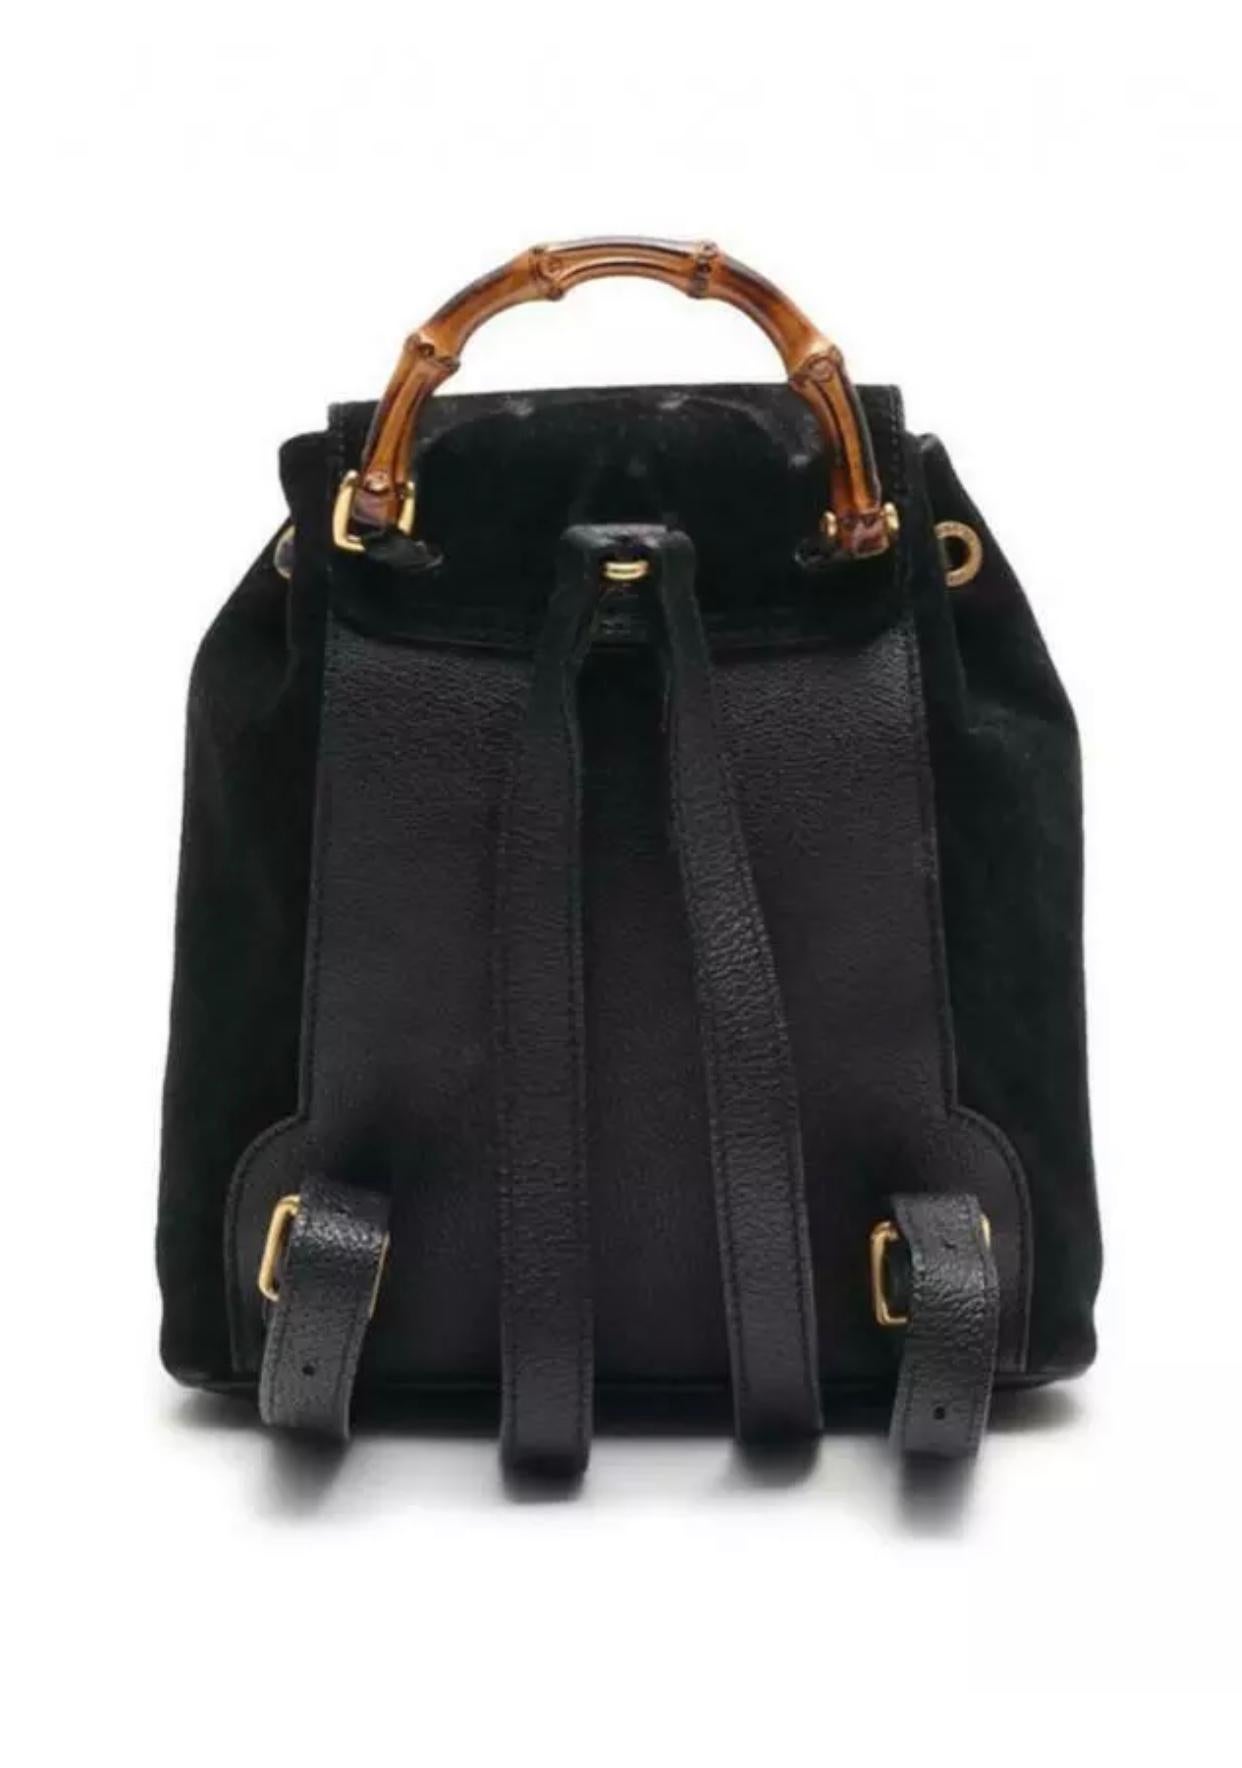 This backpack features a suede body, flat leather back straps, bamboo top handle, top flap with button closure, drawstring closure, exterior flap pocket with bamboo twist lock closure, and interior zip pocket.   
Dimensions (cm) : 24 x 22 x 7  